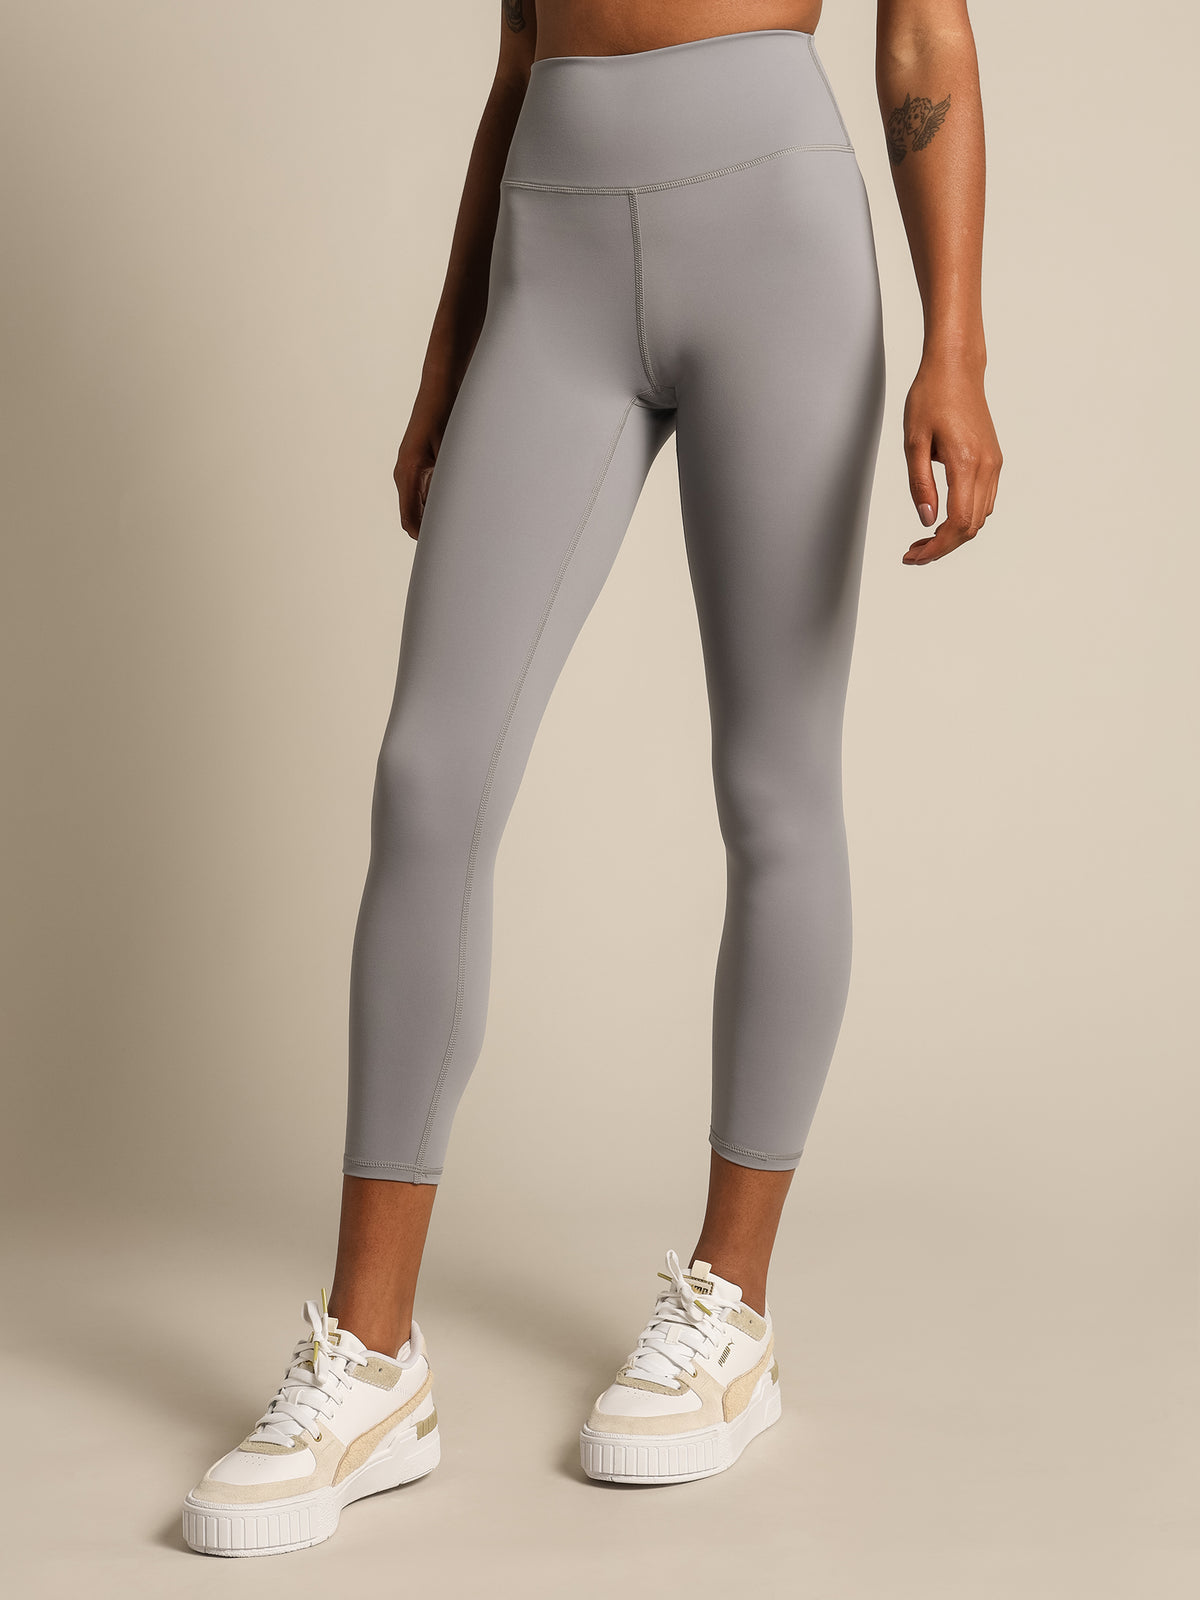 Nude Active High-Rise 7/8 Leggings in Slate Blue